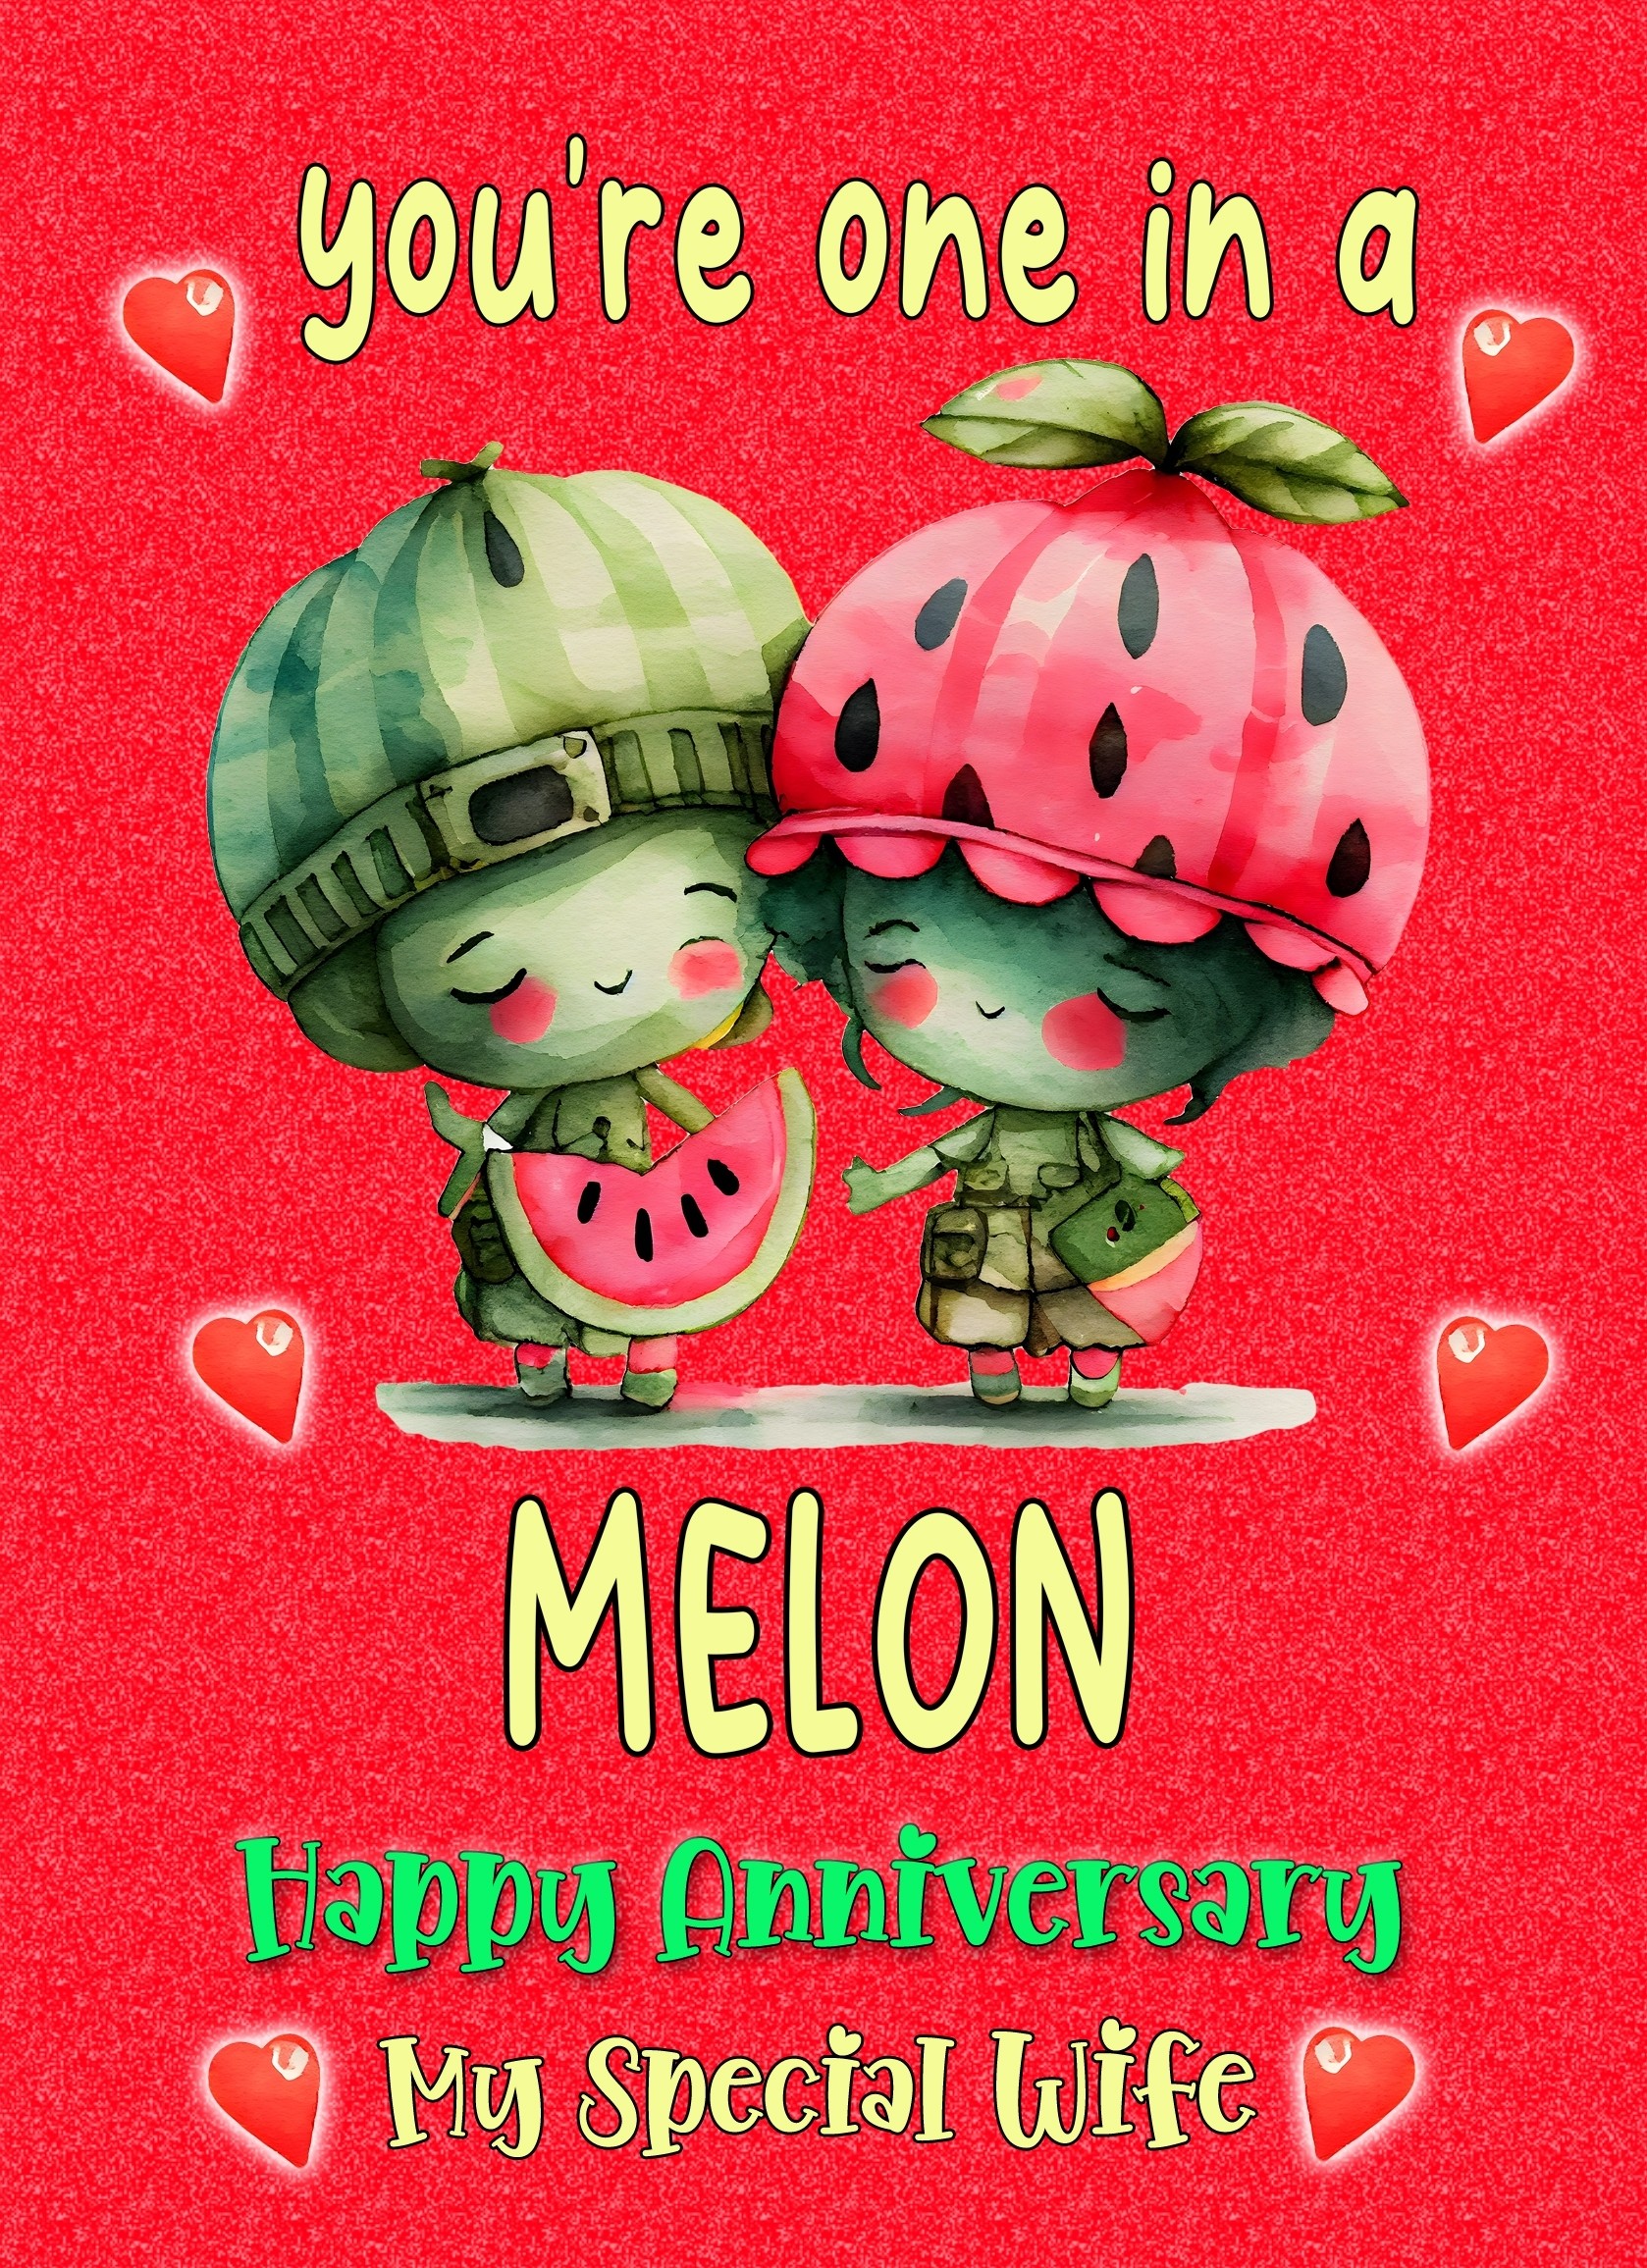 Funny Pun Romantic Anniversary Card for Wife (One in a Melon)